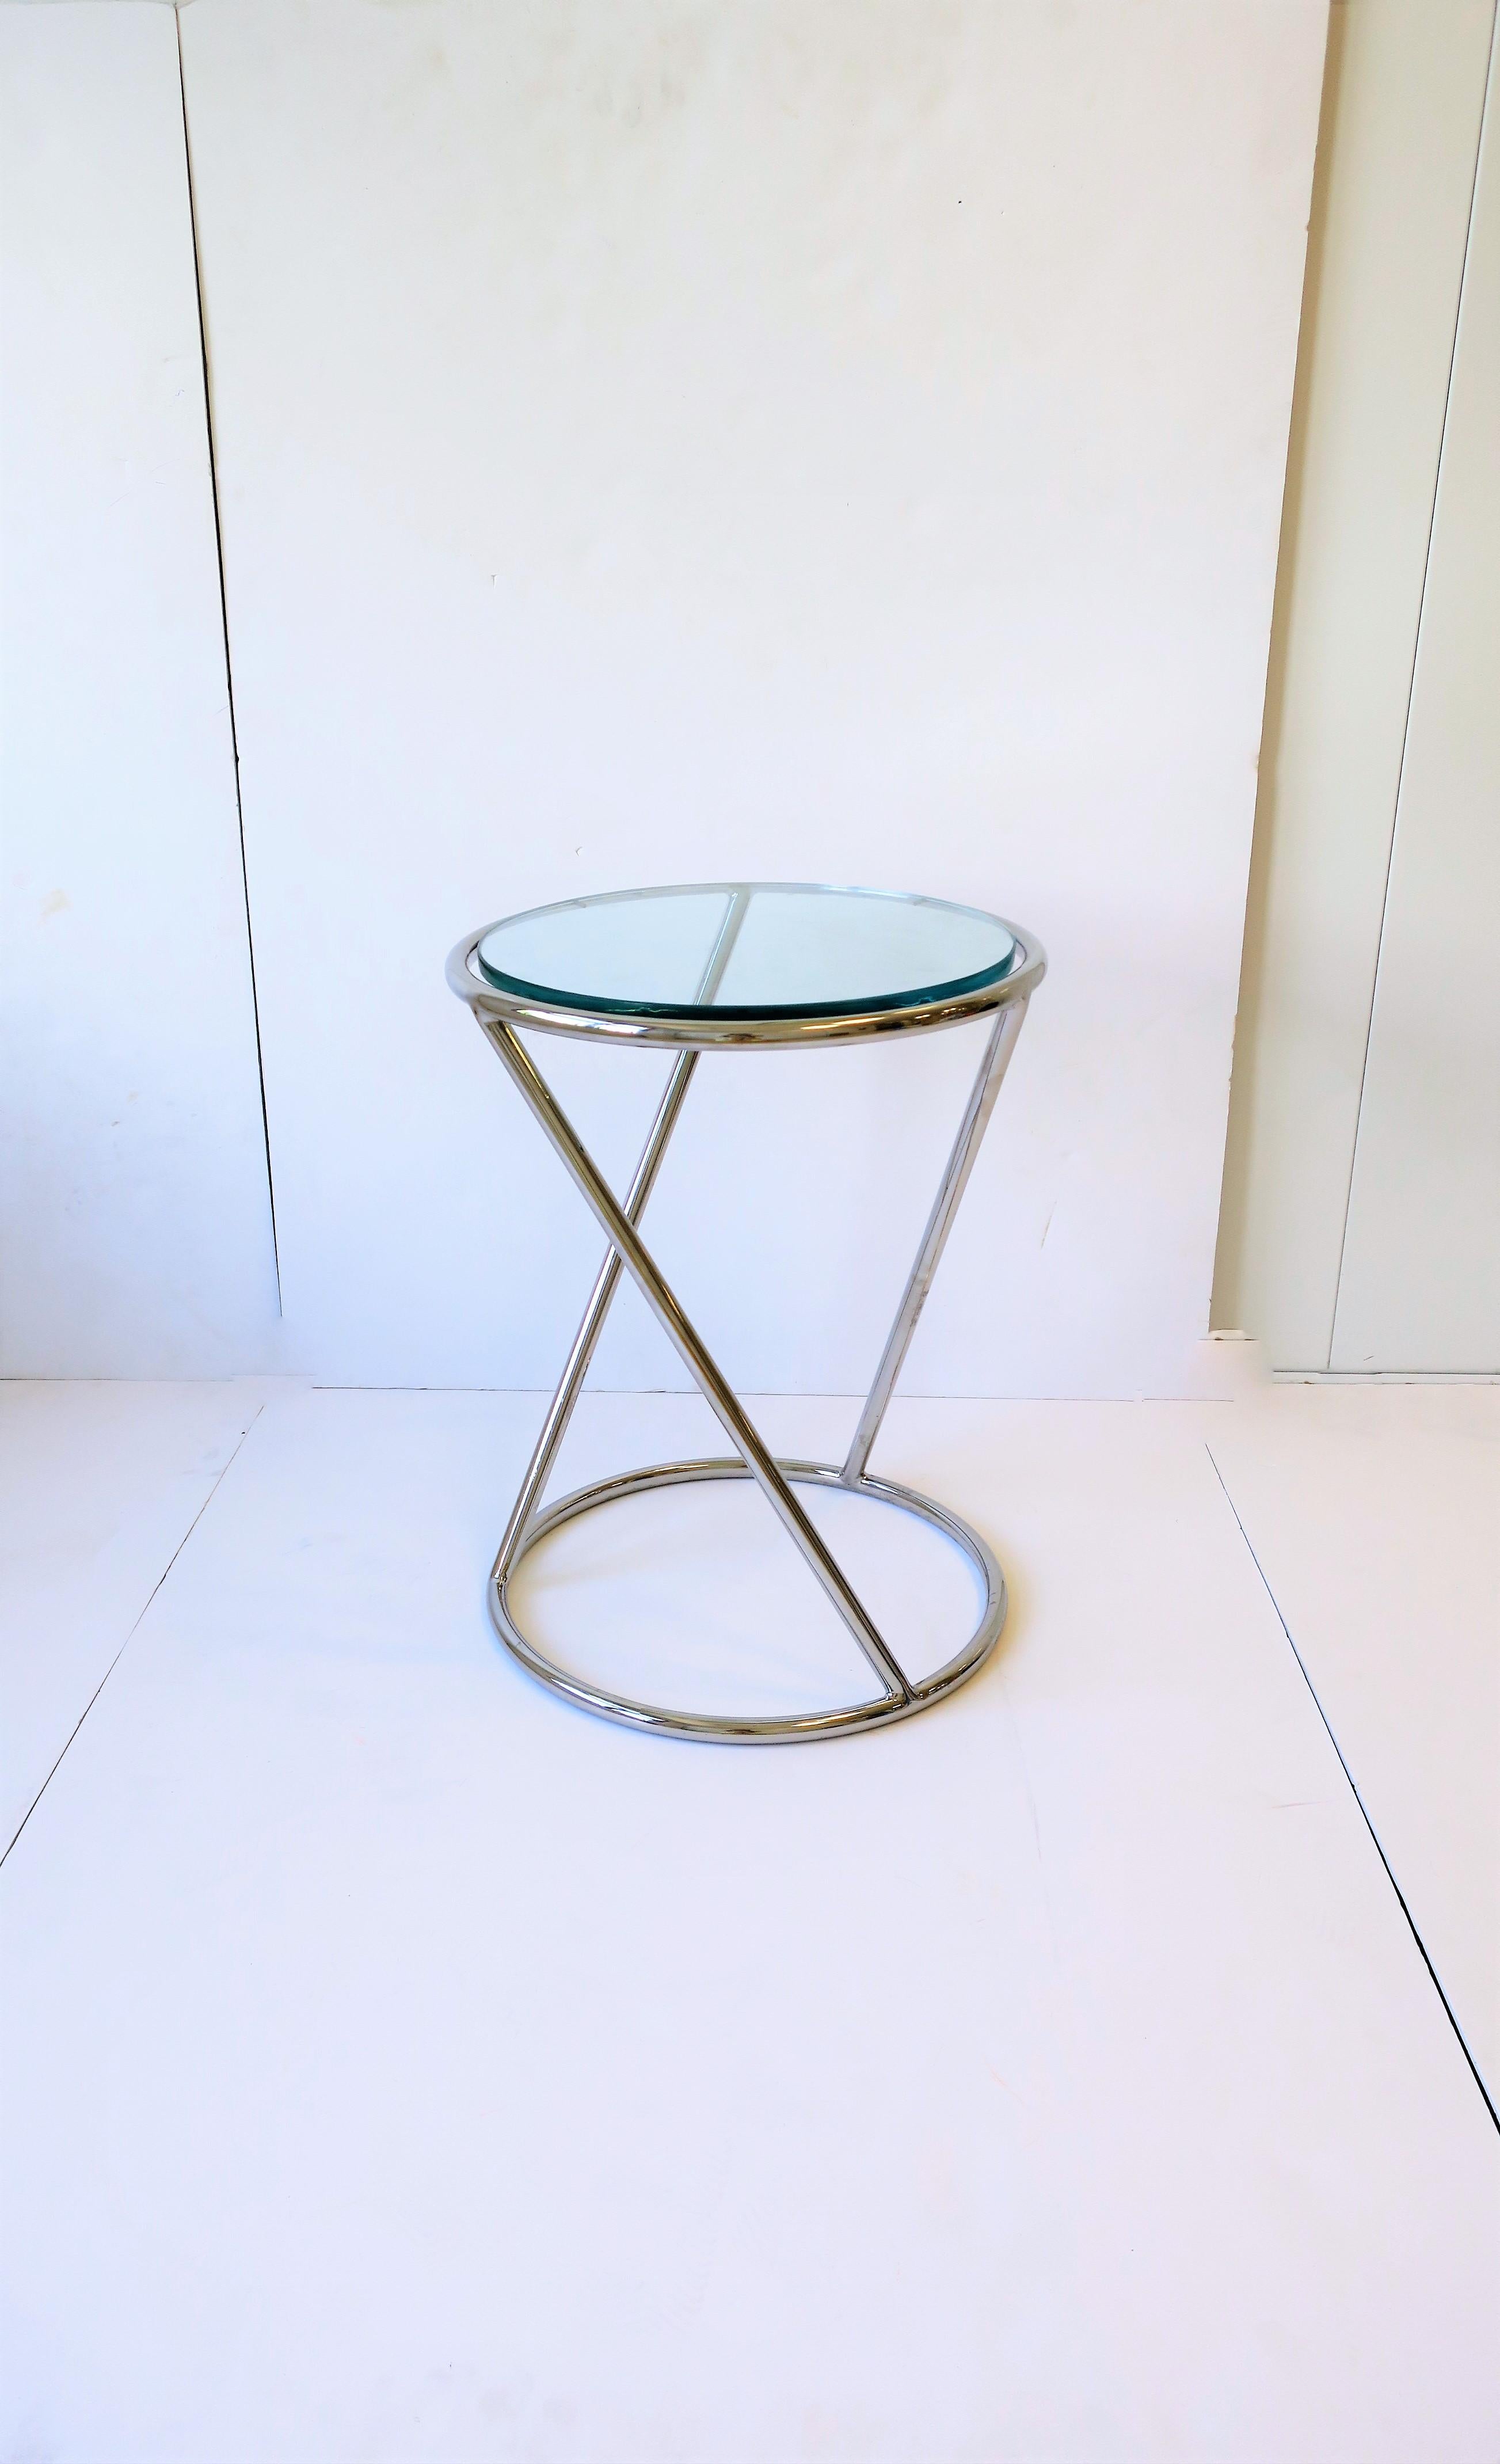 A chrome round side or drinks table with substantial glass top in the style of Modern, circa late-20th century. Dimensions: 14.25